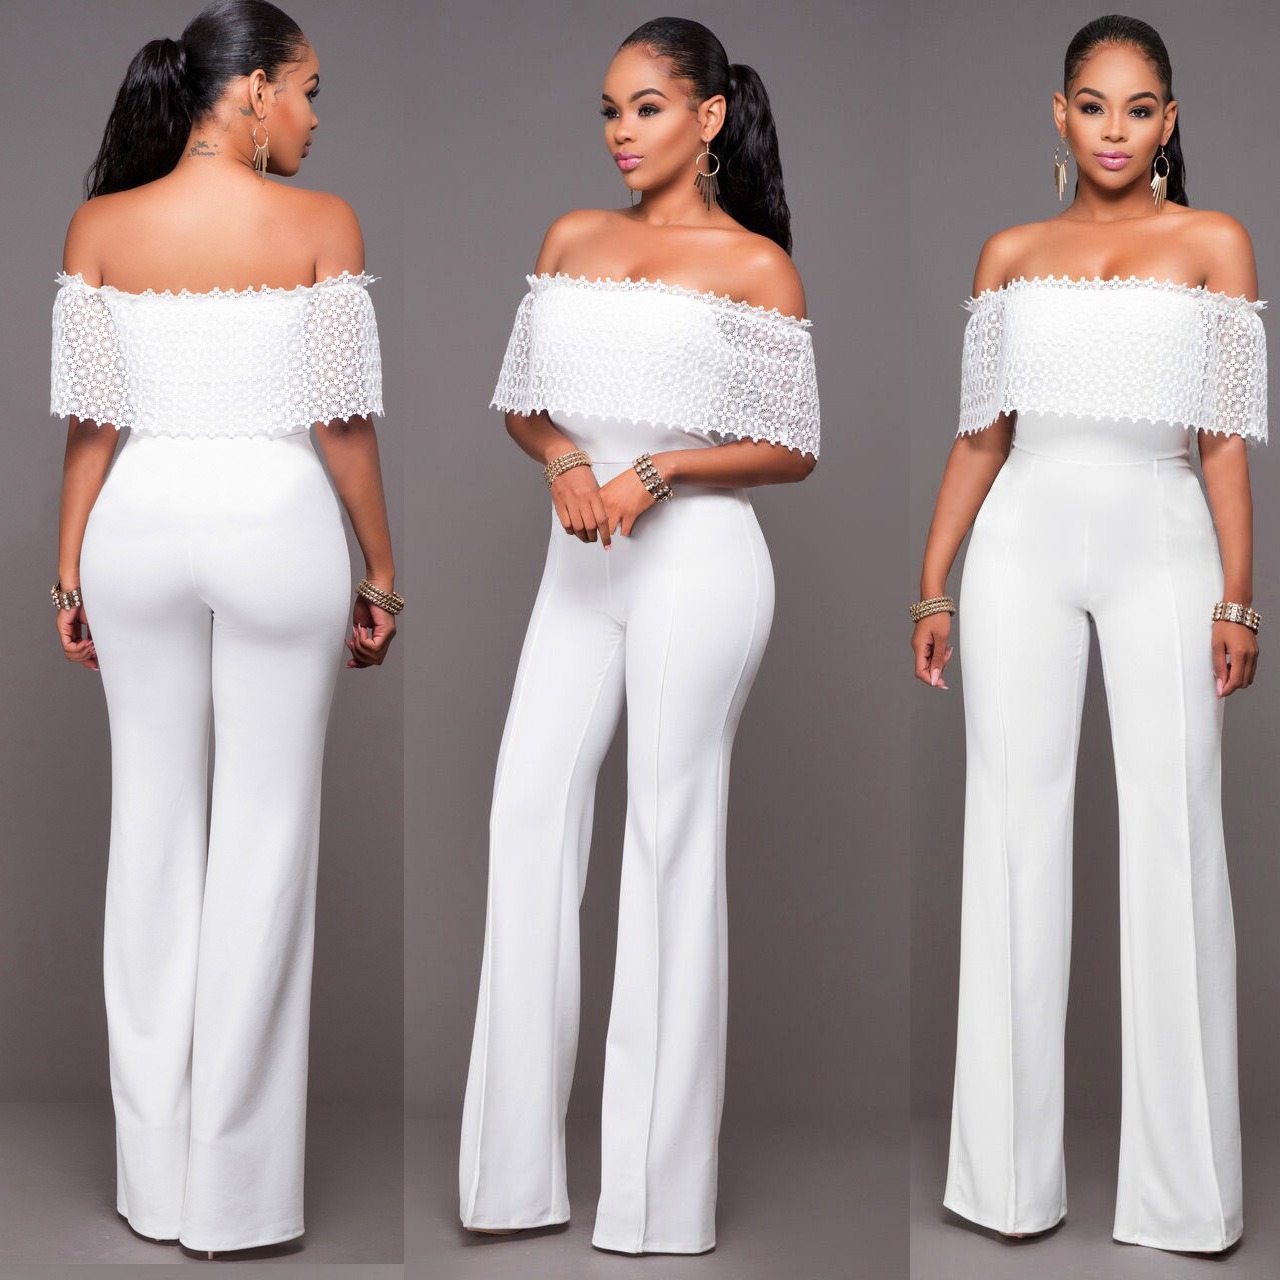 Sexy White Off Shoulder Lace Long Club Jumpsuit on Luulla